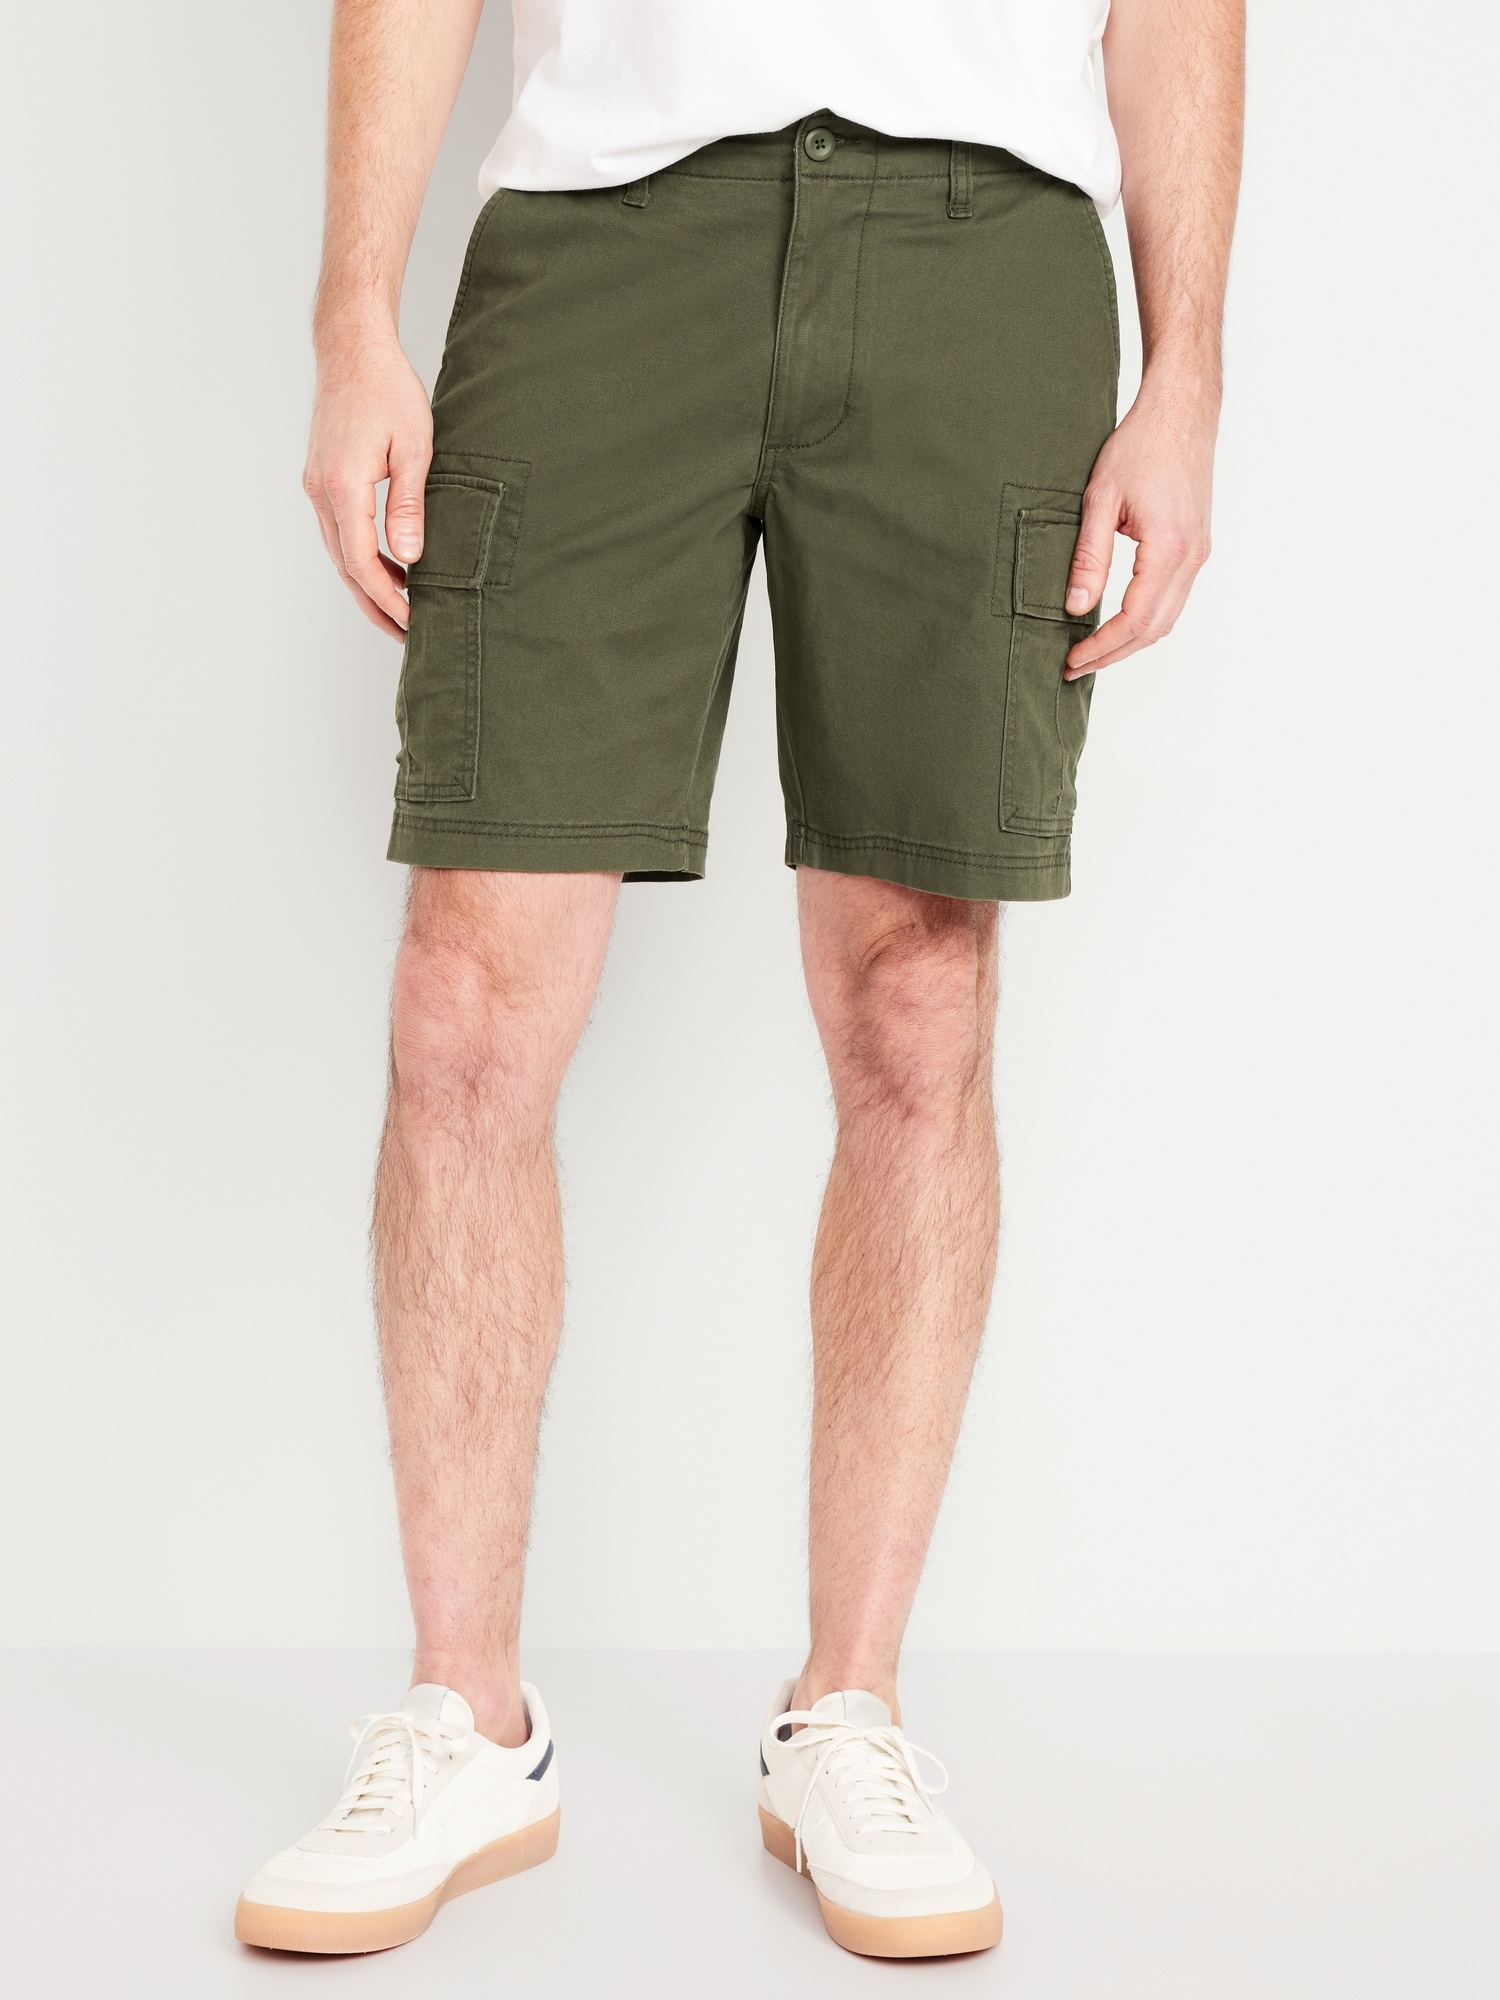 Lived In Cargo Shorts 10 Inch Inseam Old Navy